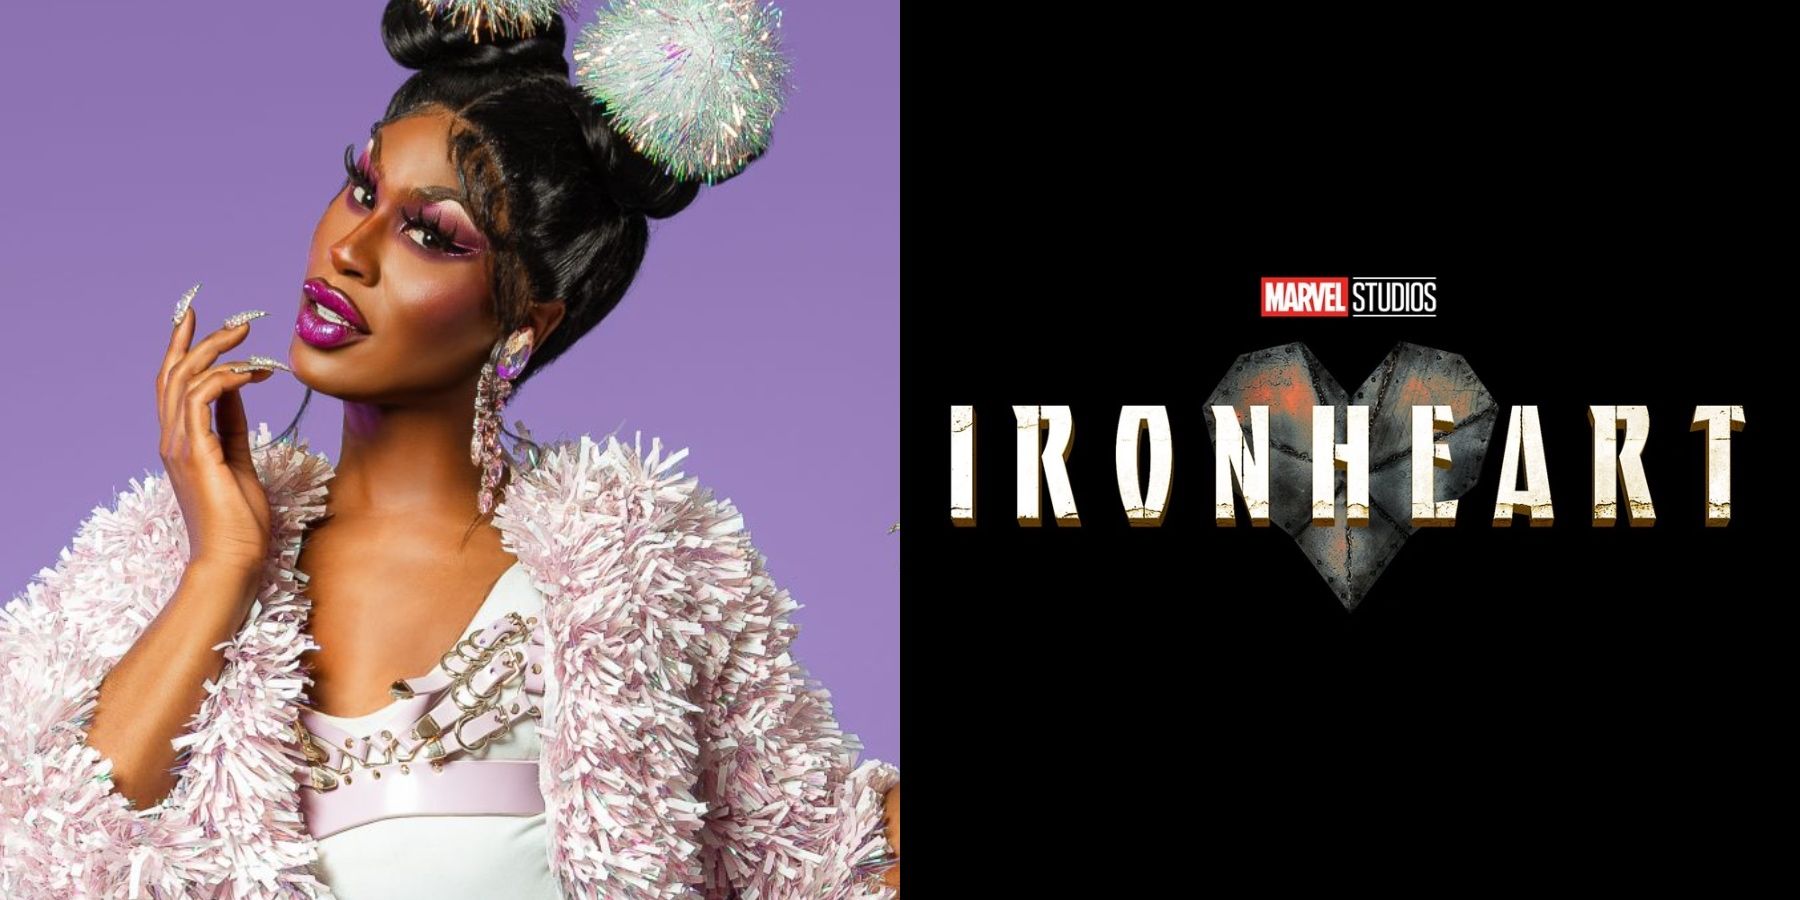 RuPaul's Drag Race Winner Shea Couleé Joins the Cast Of Marvel's Ironheart